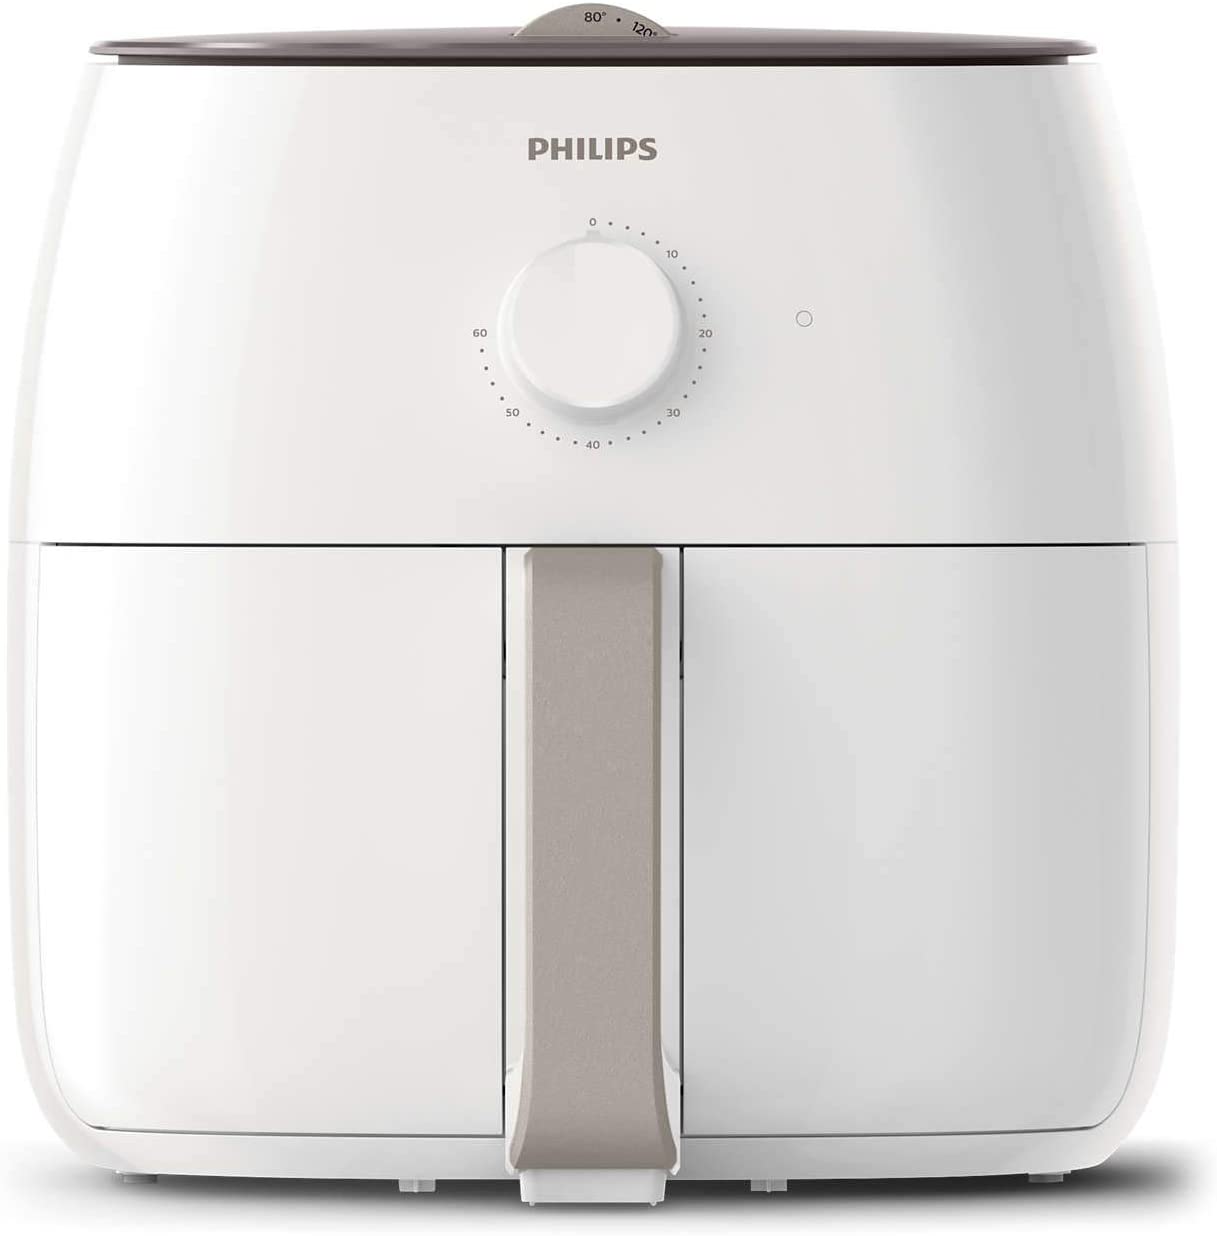 PHILIPS Air Fryer XXL Rapid Air Technology for Healthy Cooking PHILIPS Air Fryer XXL Rapid Air Technology for Healthy Cooking